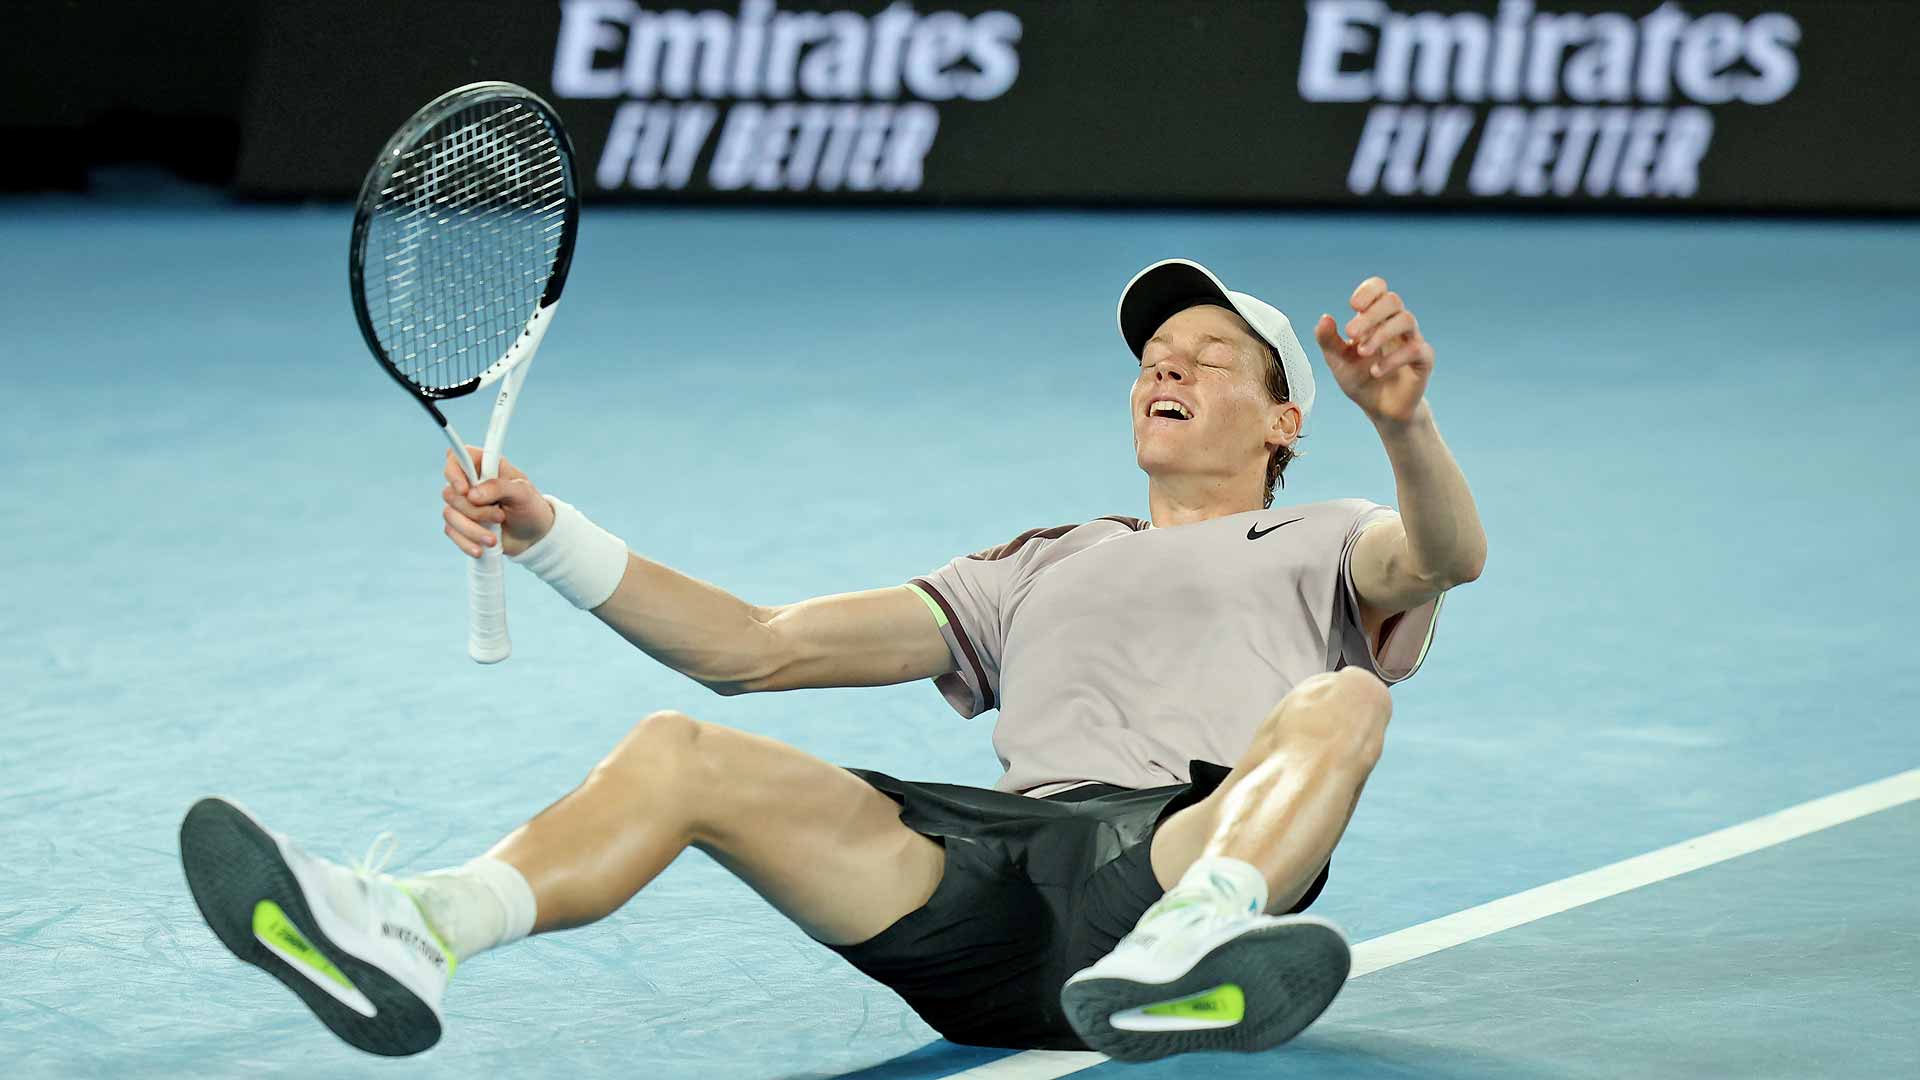 Jannik Sinner falls to the court after beating Daniil Medvedev for his maiden Grand Slam crown at the Australian Open.